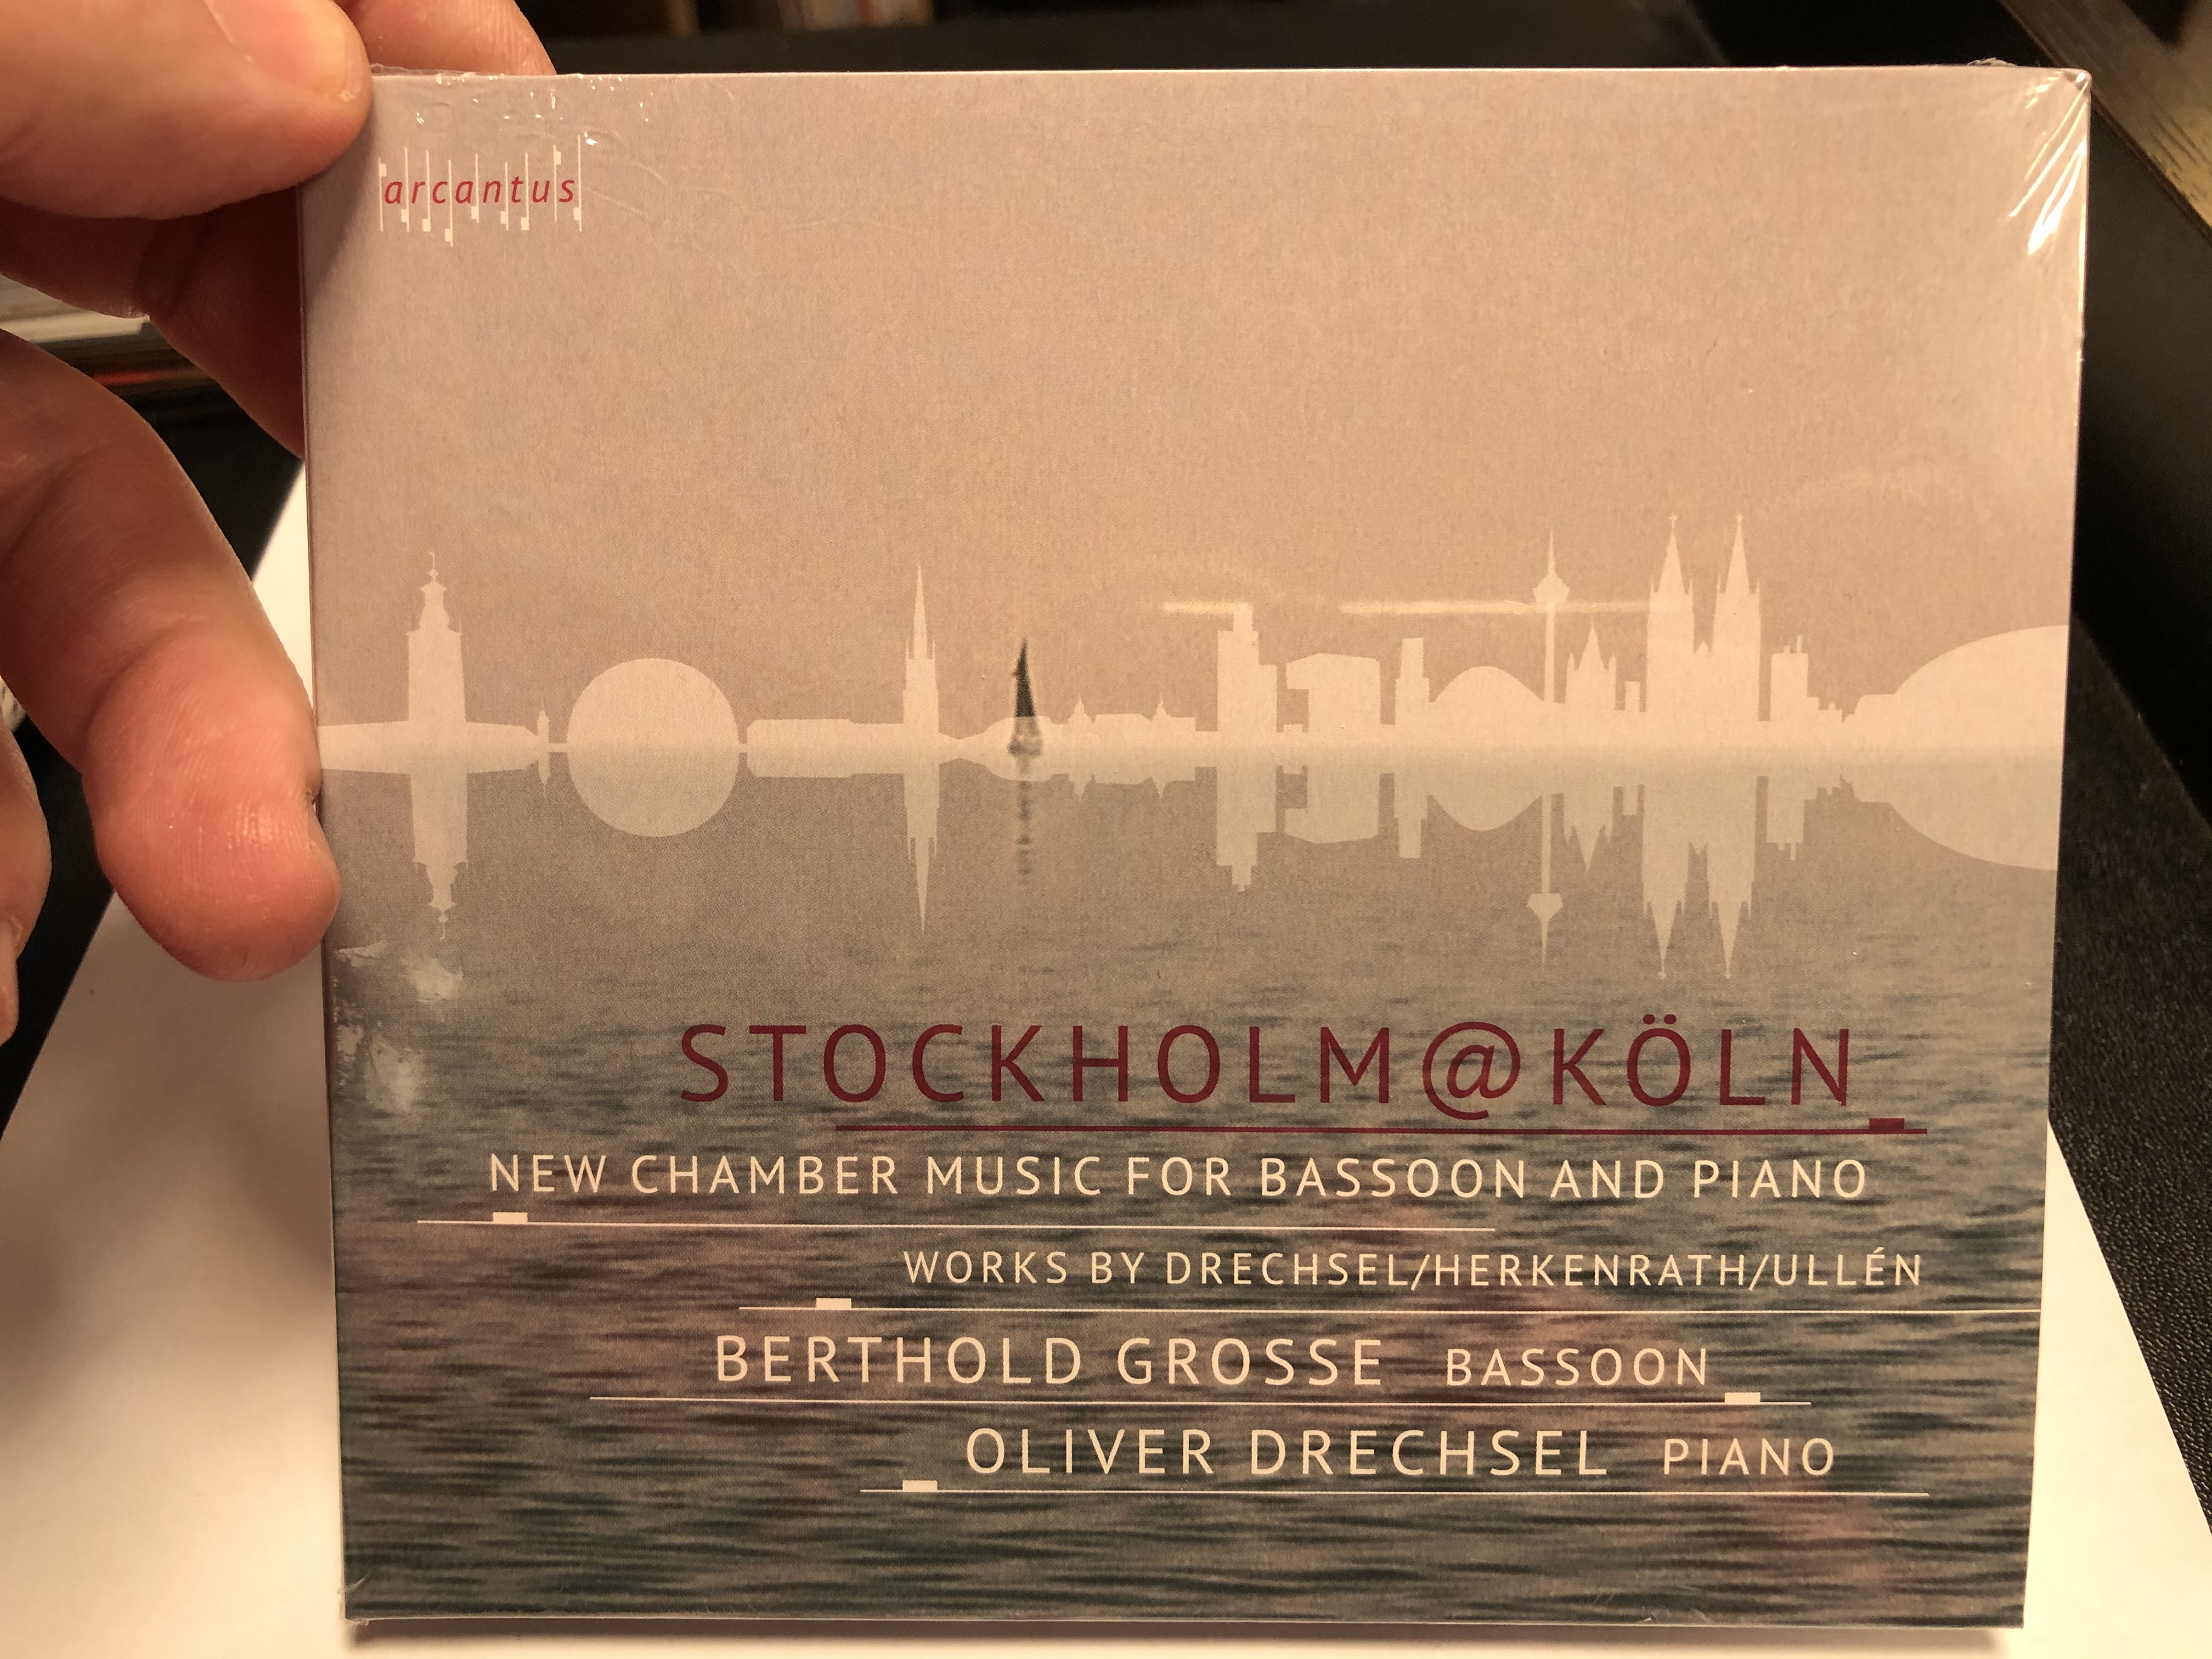 stockholm-koln-new-chamber-music-for-bassoon-and-piano-works-by-drechsel-herkenrath-ullen-berthold-grosse-bassoon-oliver-drechsel-piano-arcantus-audio-cd-2019-arc-19018-1-.jpg